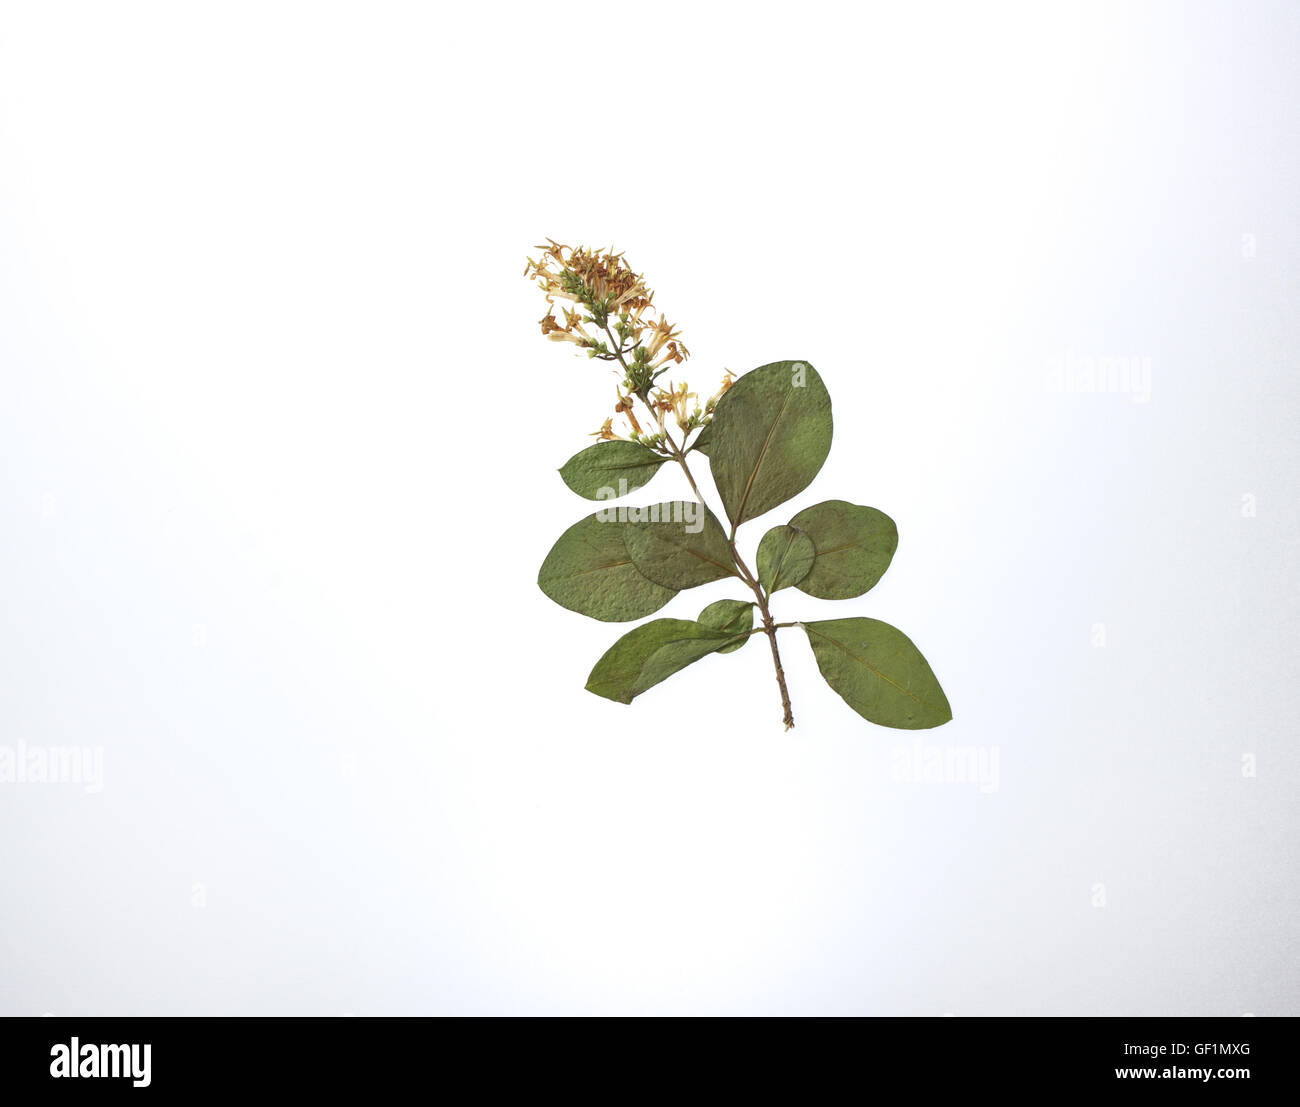 pressed flowers and leaves on white background Stock Photo